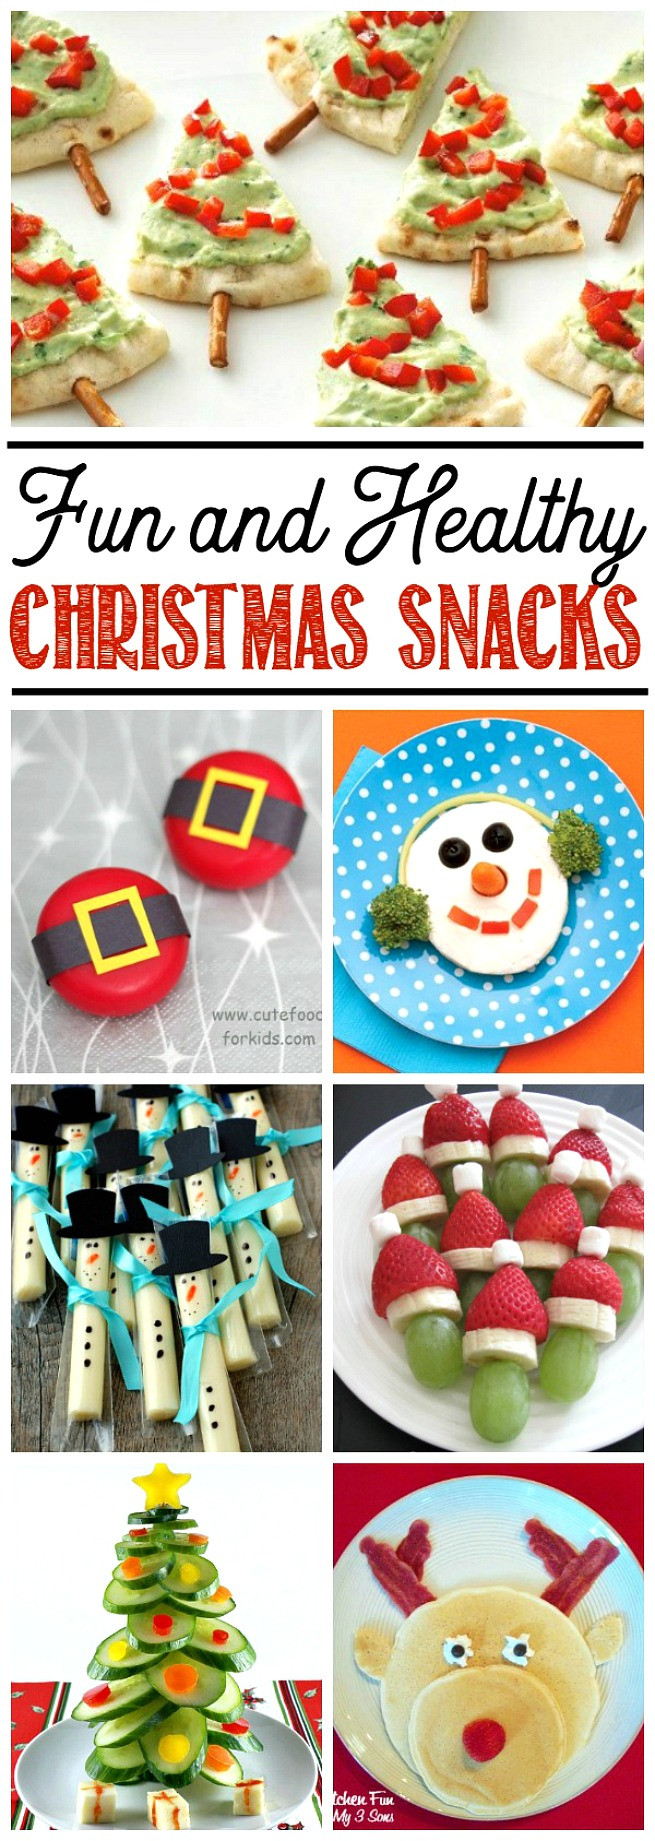 Holiday Class Party Food Ideas
 Chocolate Rice Krispie Gingerbread Men Pops Clean and